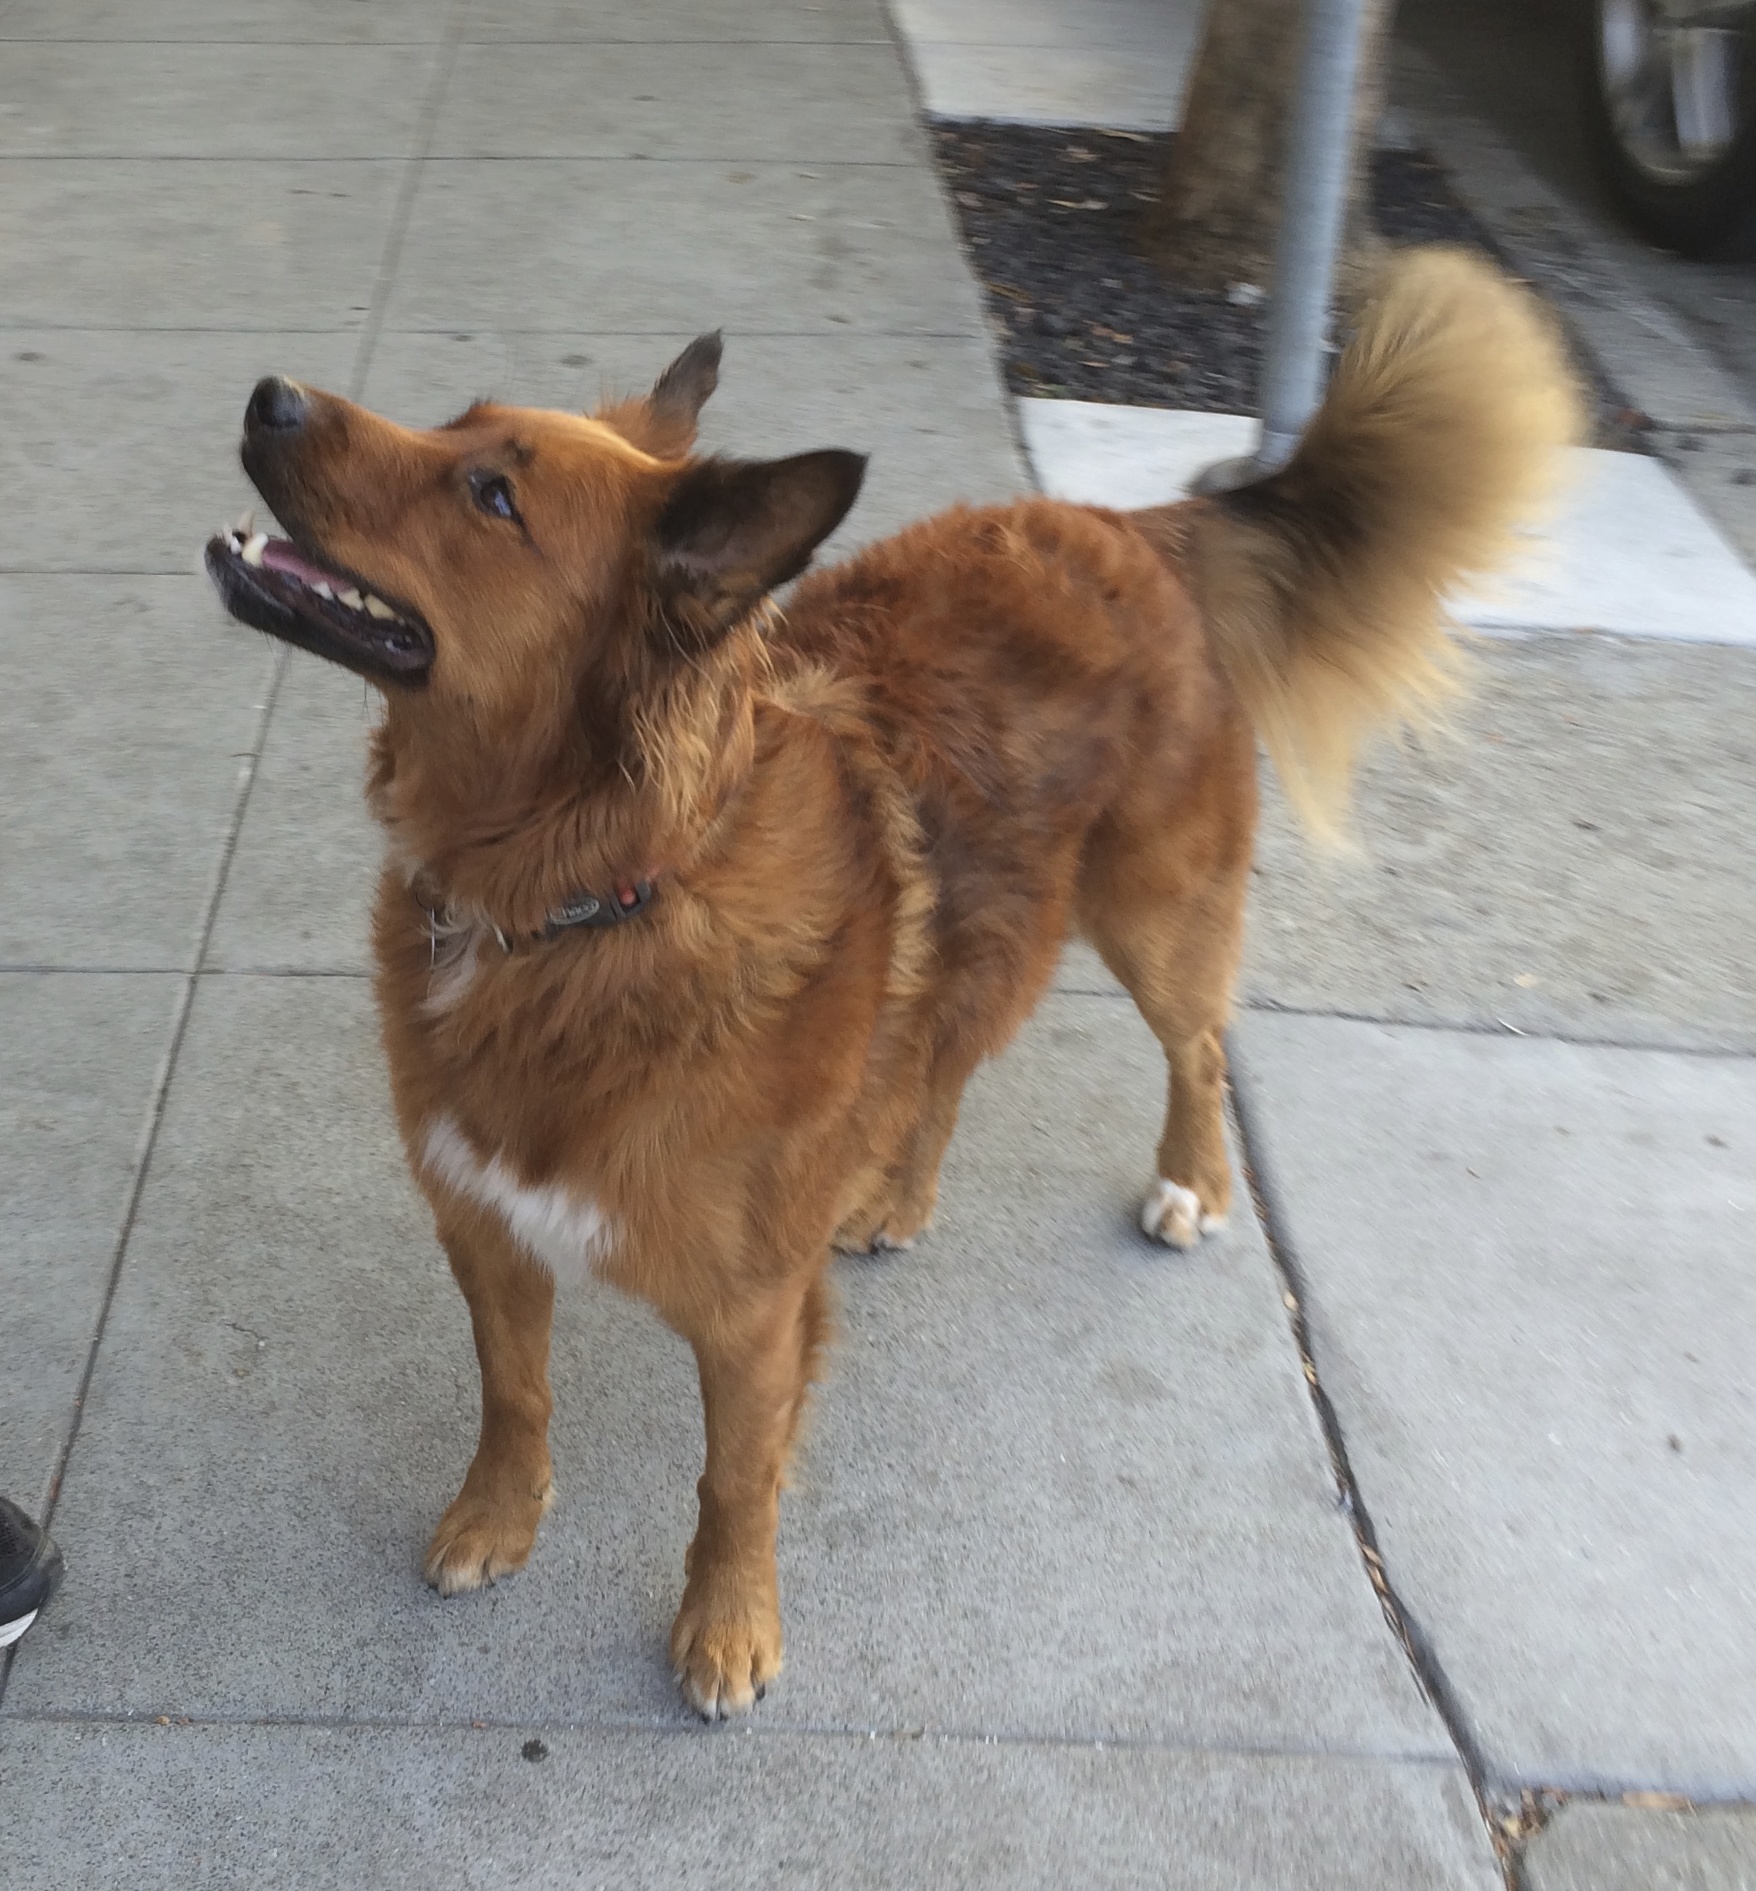 What? He’s who? | The Dogs of San Francisco